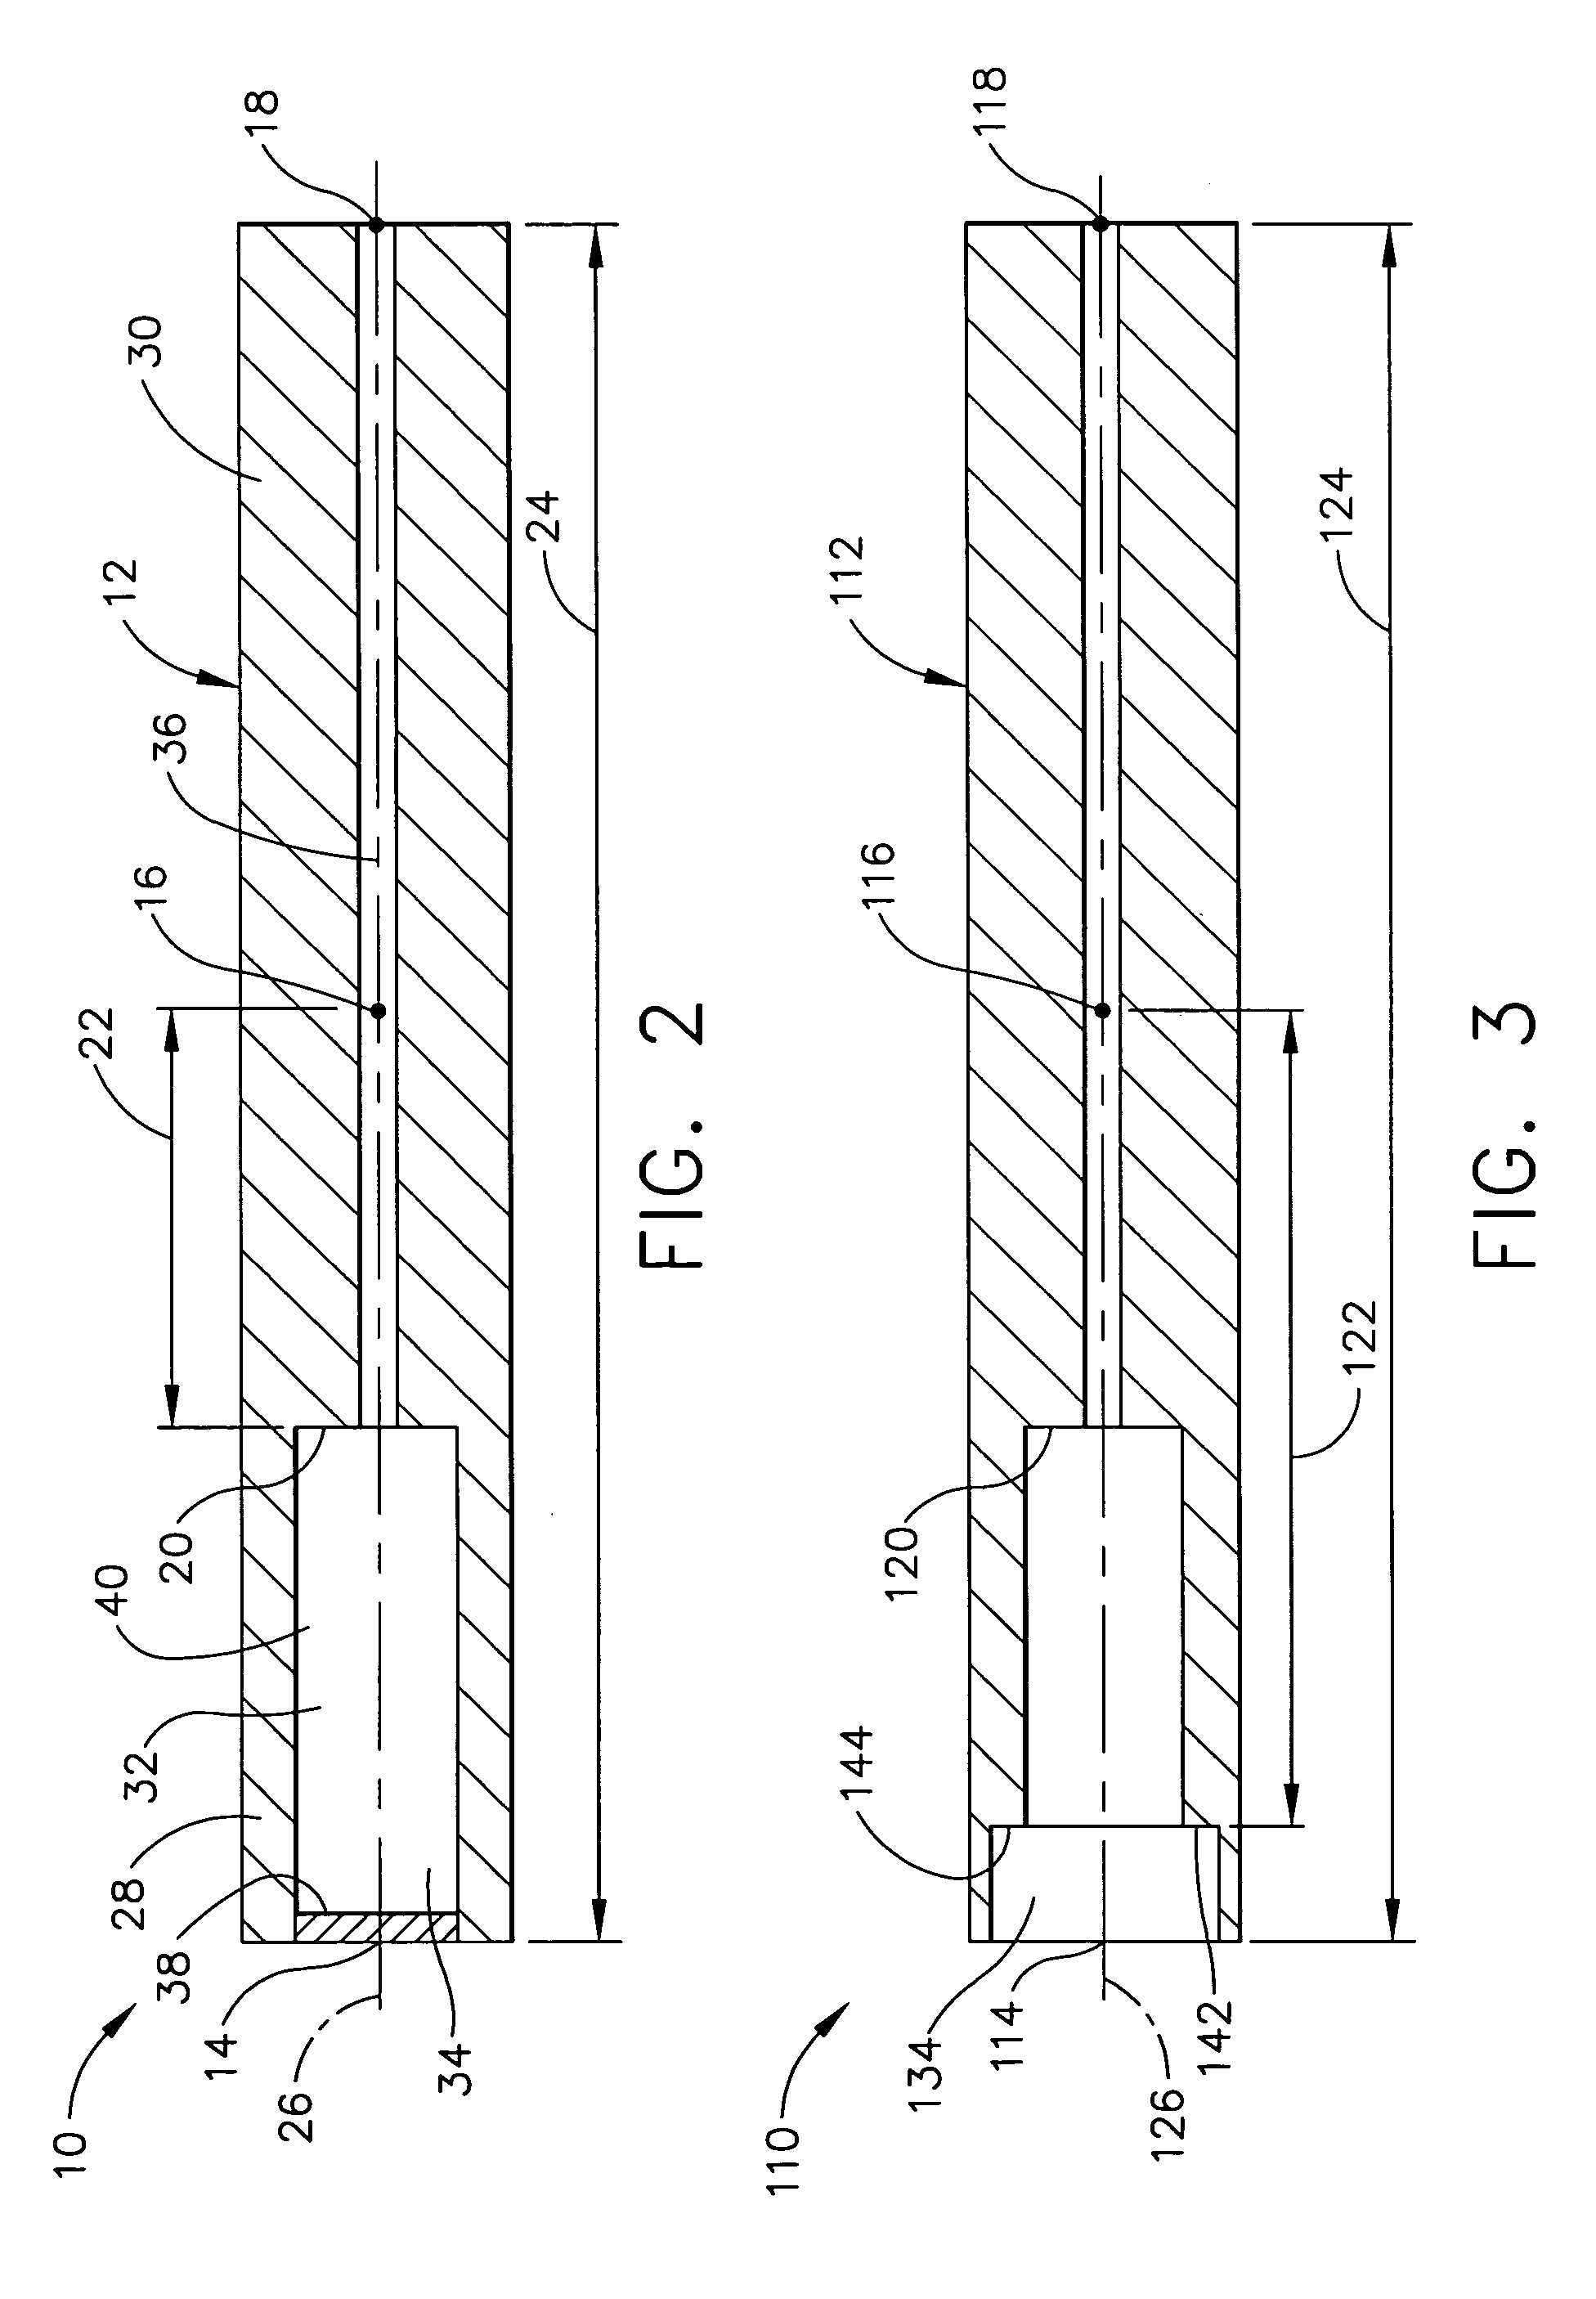 Ultrasonic surgical blade and instrument having a gain step